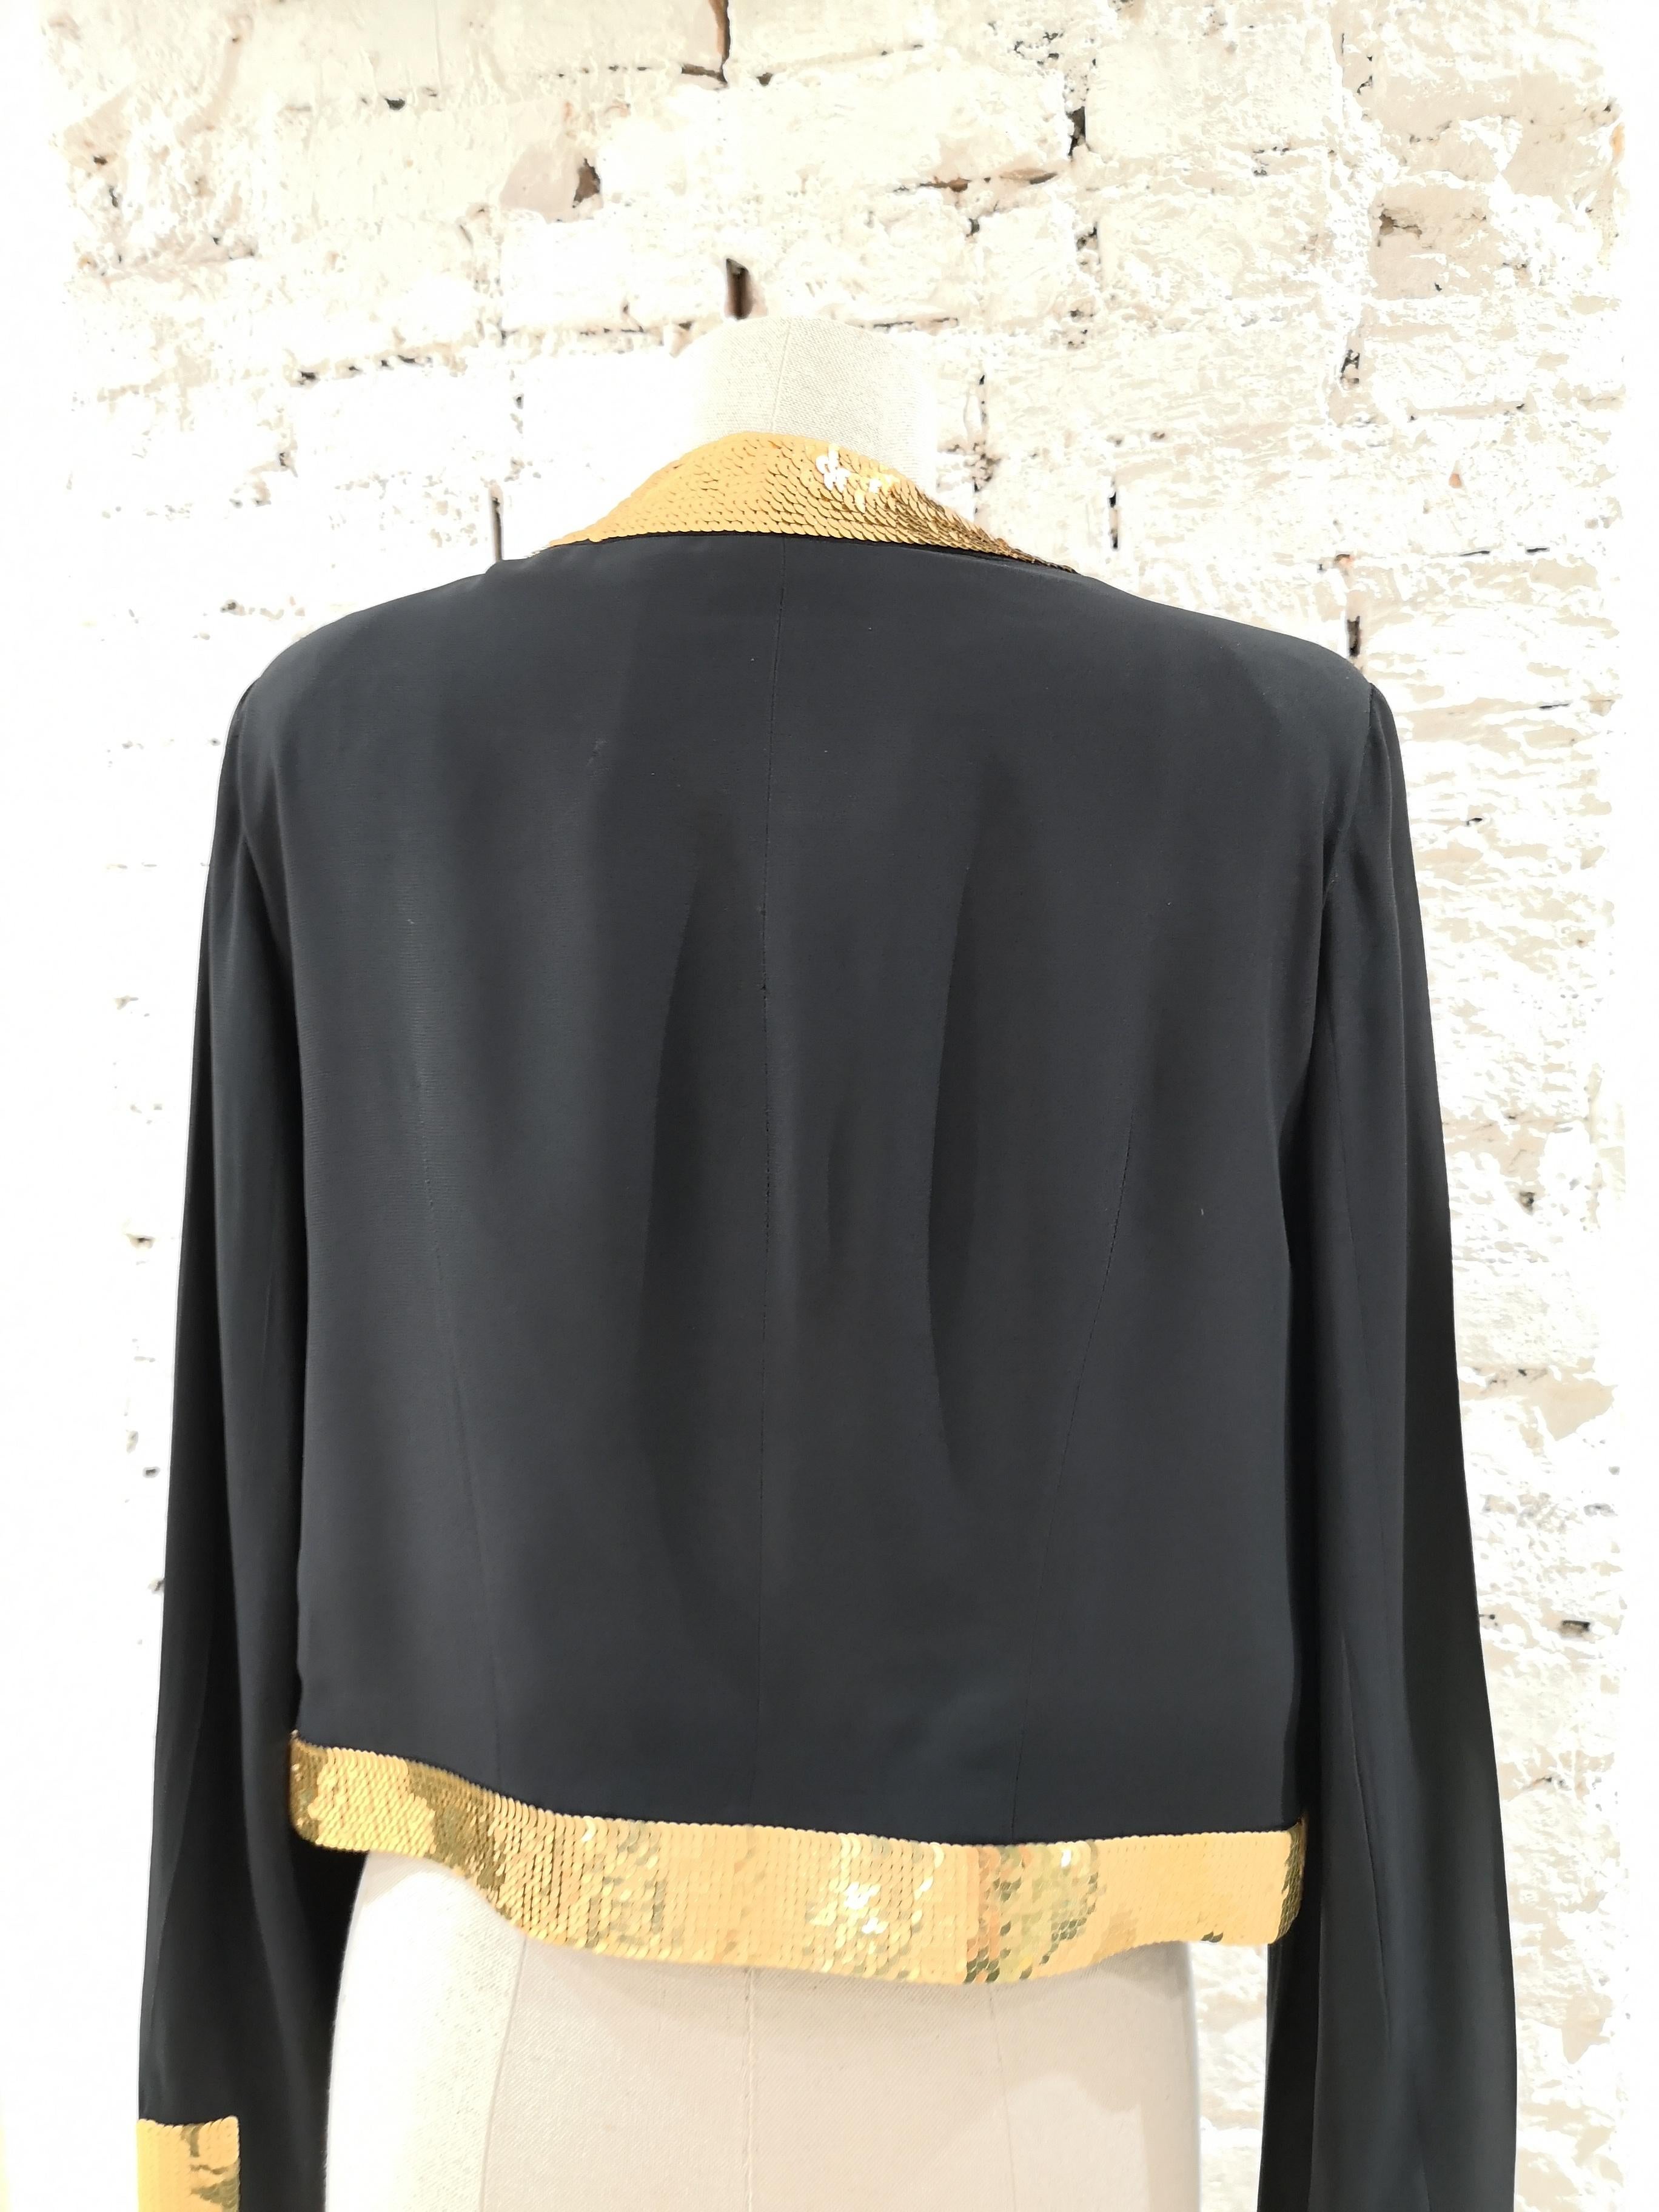 Moschino Wool Black Jacket Gold Sequins 5